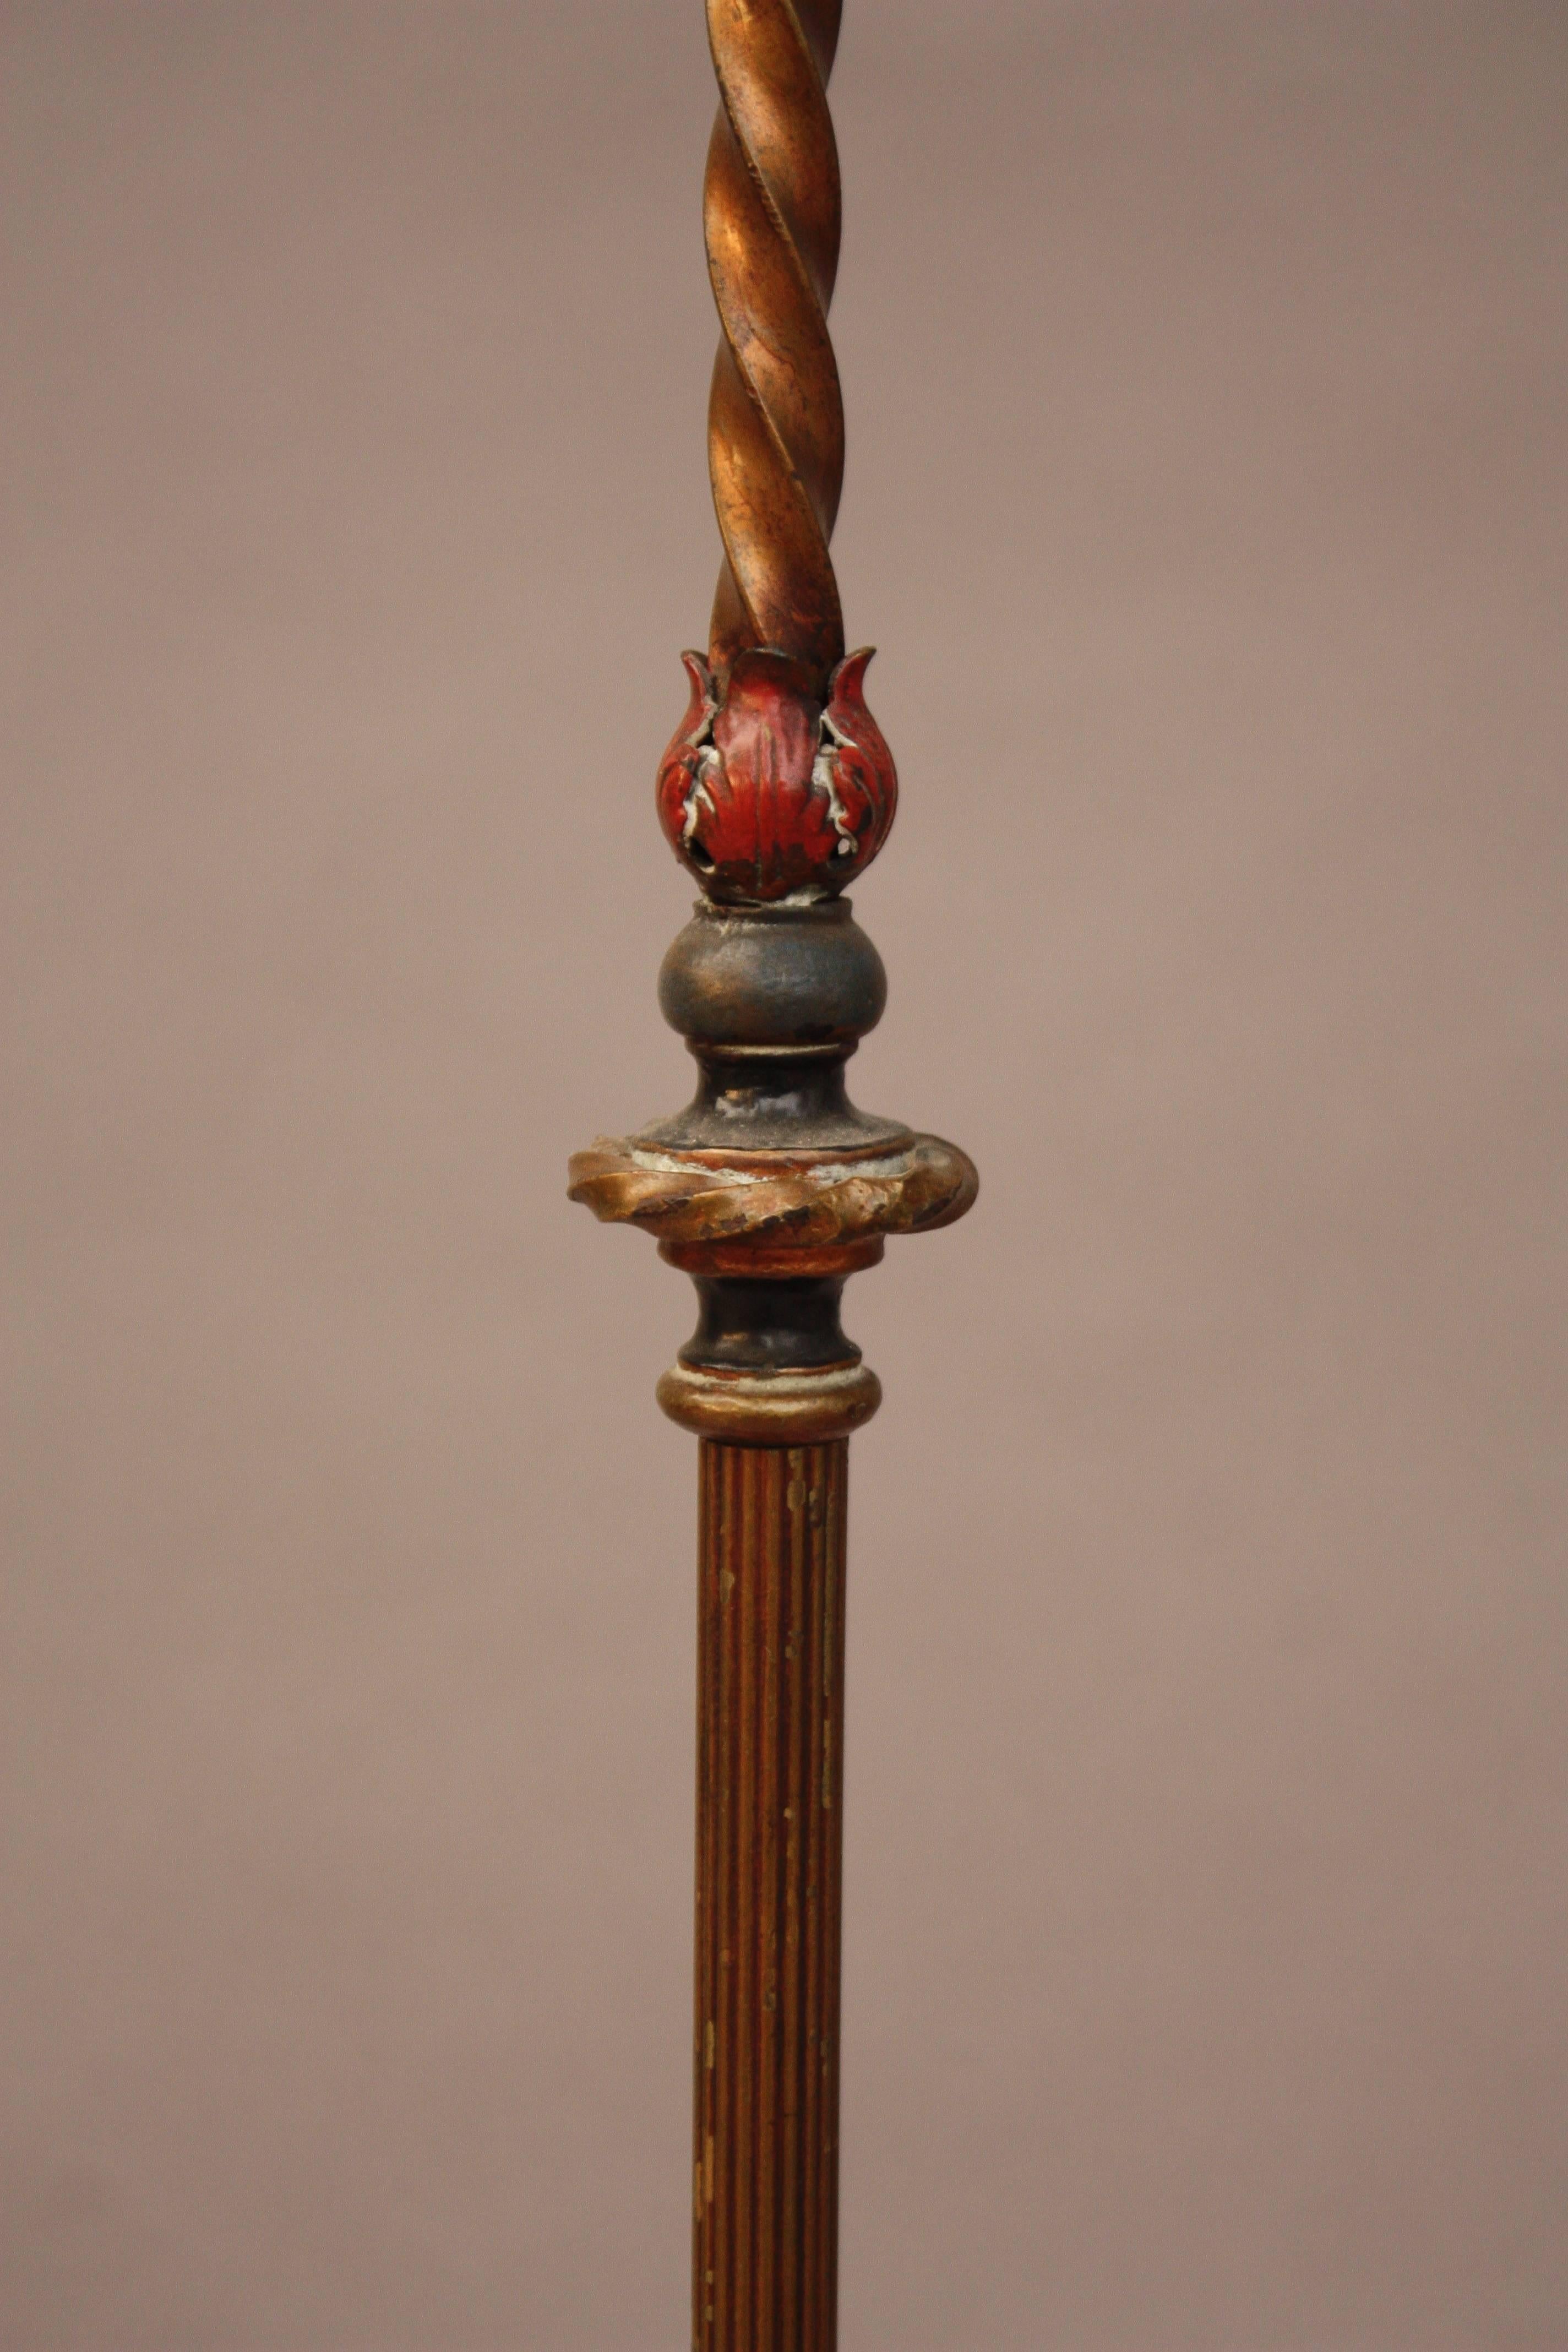 North American Exceptional 1920s Floor Lamp with Steuben Blow Glass